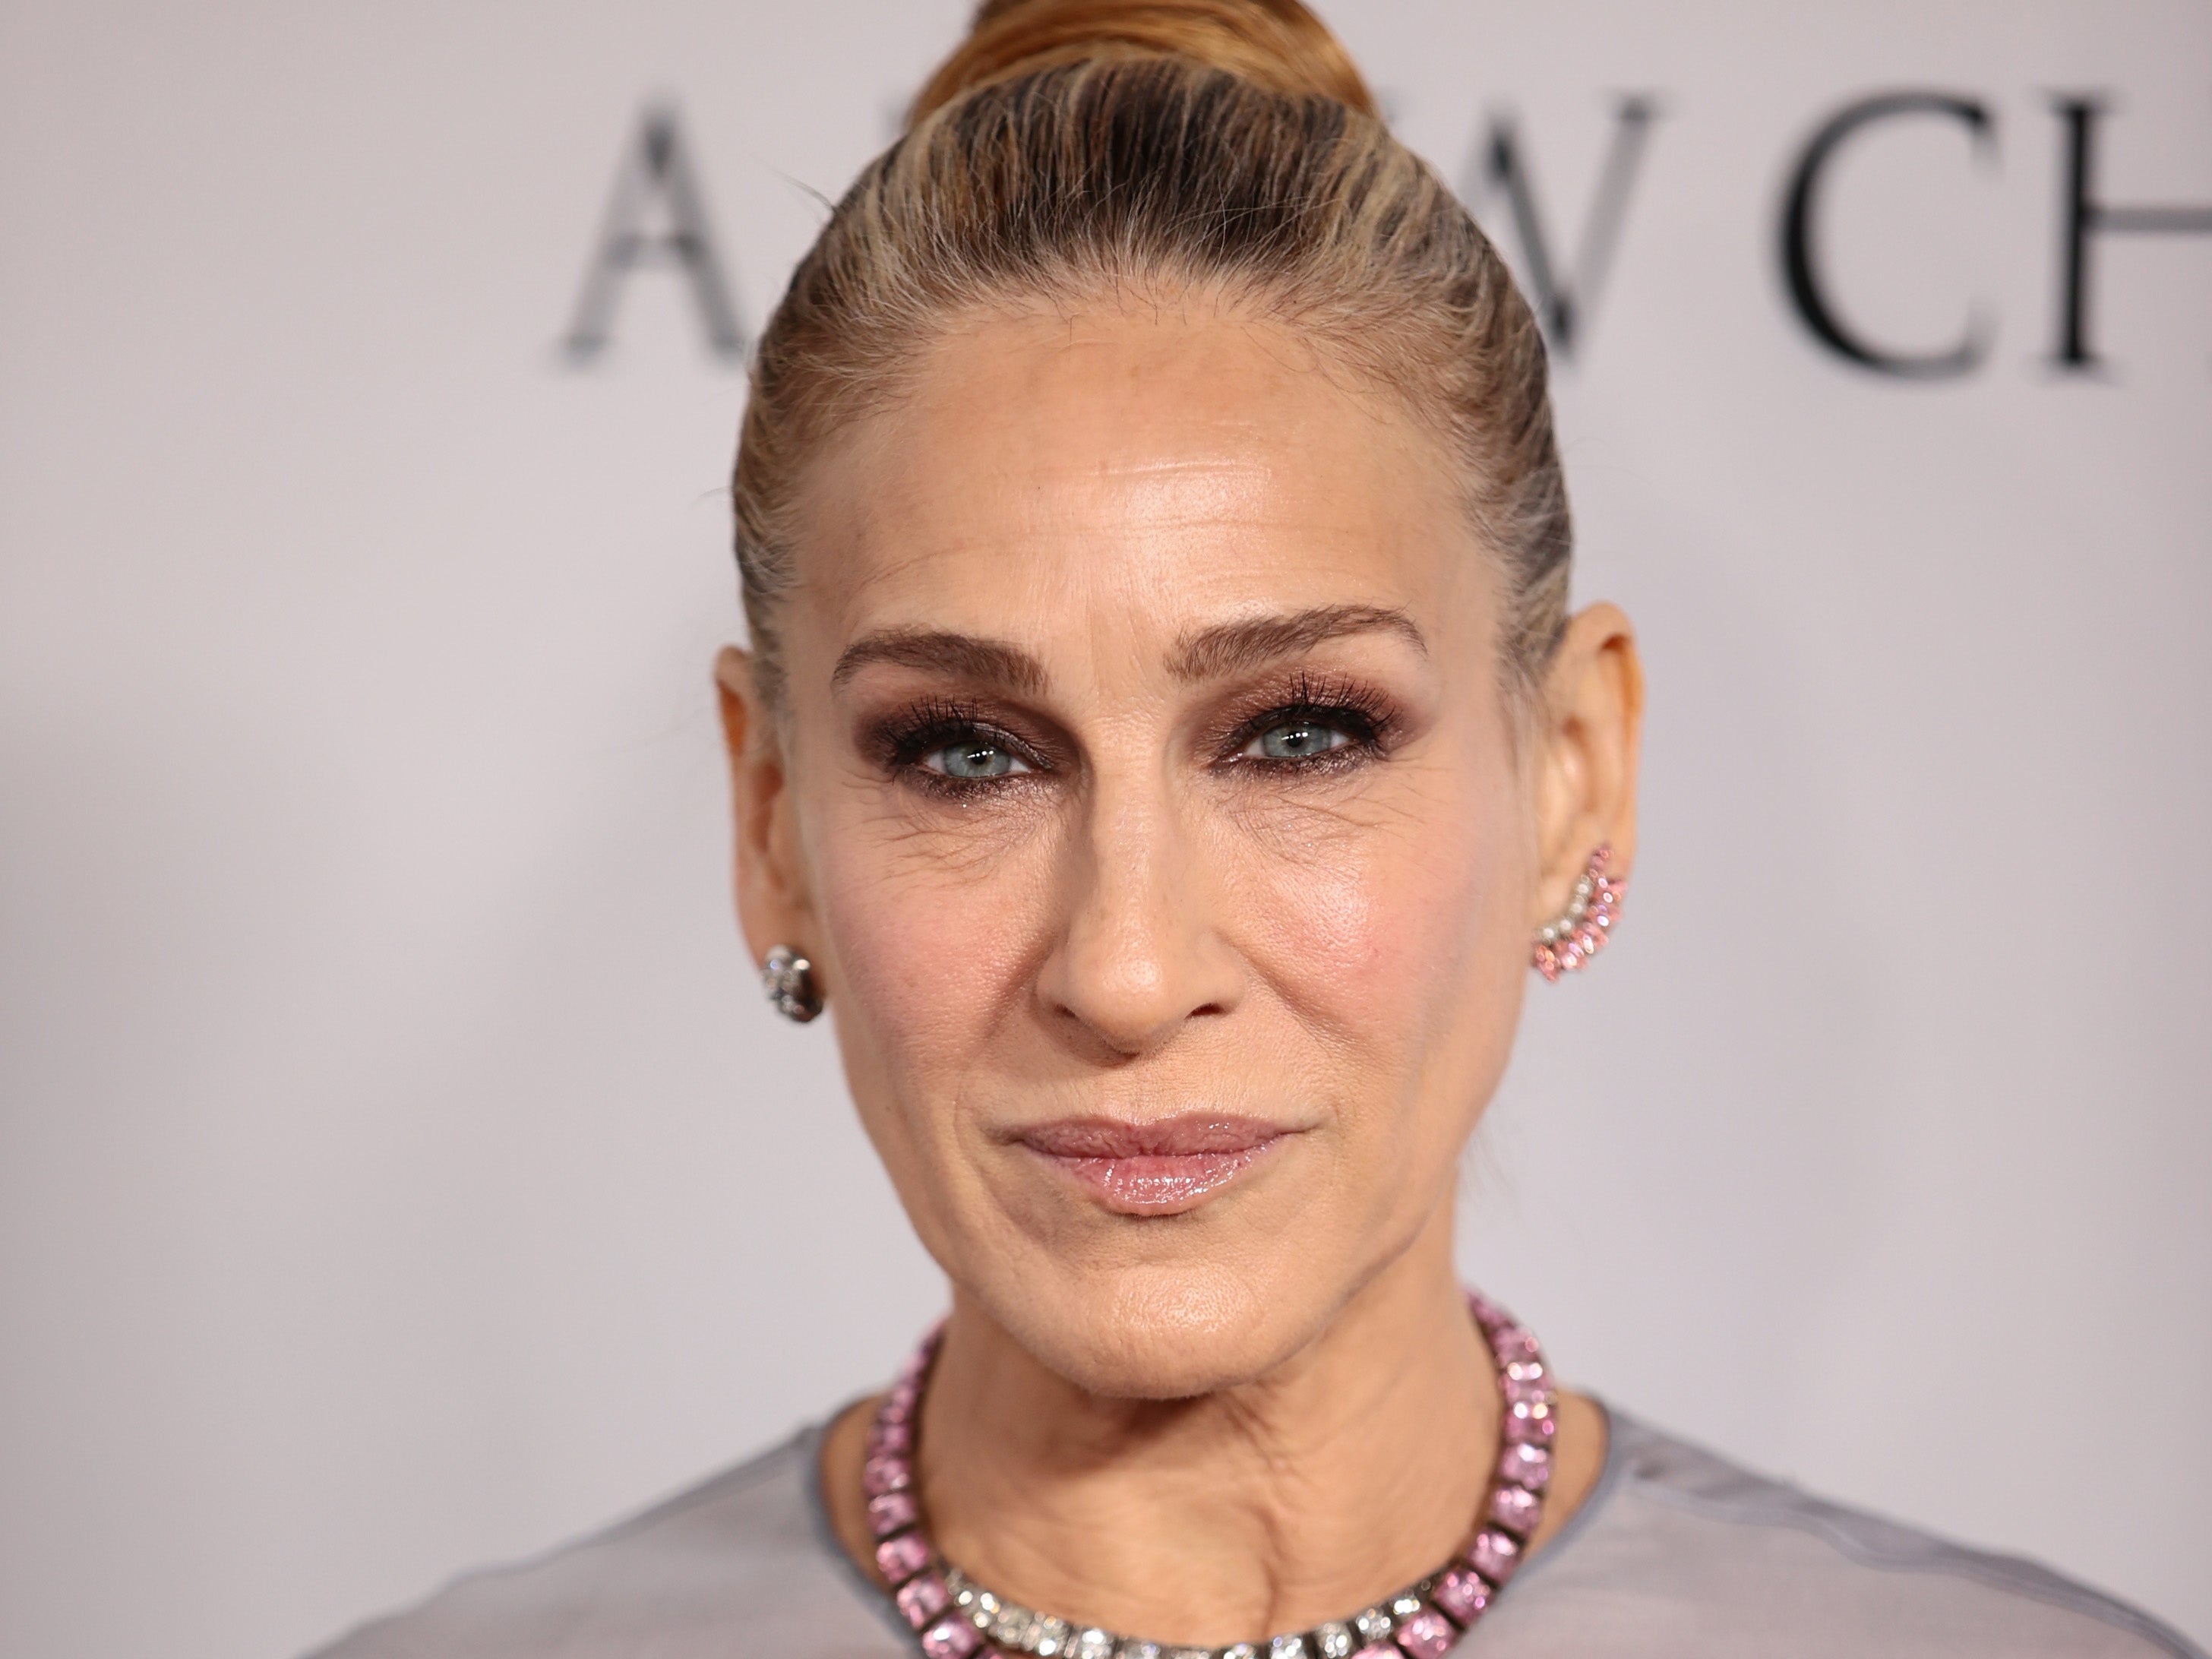 Sarah Jessica Parker described the feud as ‘one person talking’ in 2022